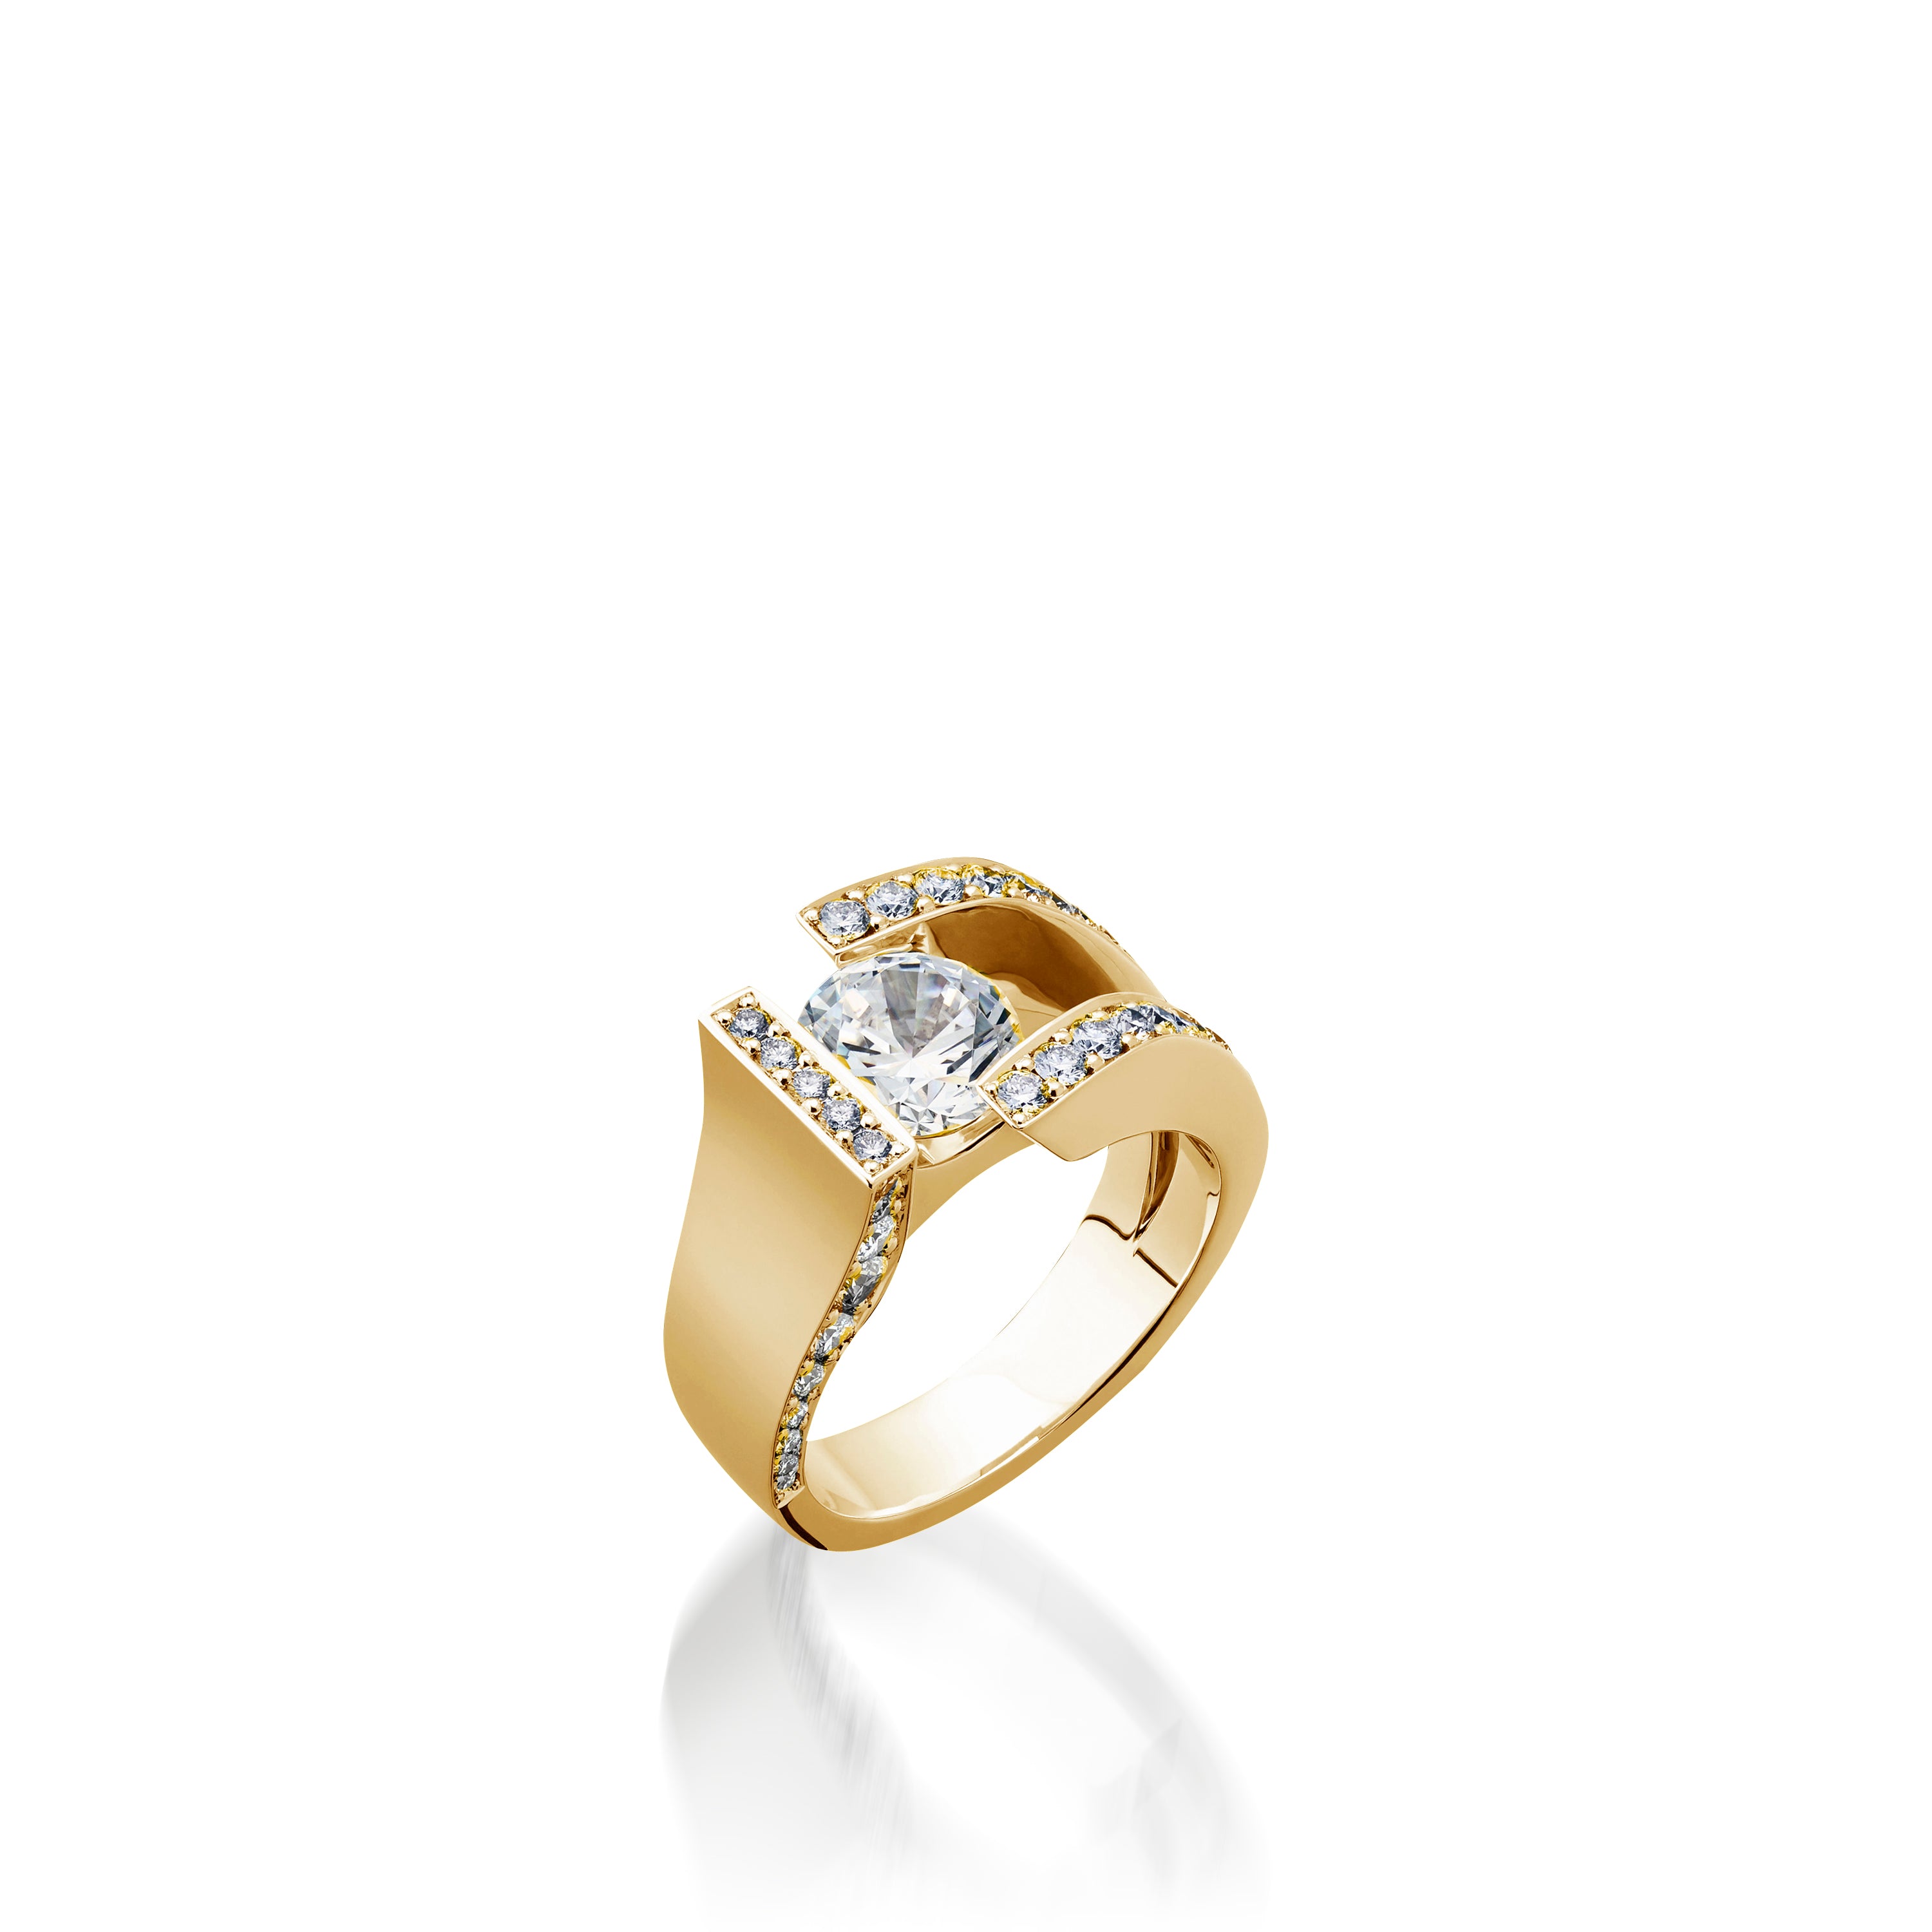 1.01ct Diamond Men's (or Unisex) Antique Solid Yellow Gold Ring -$20K